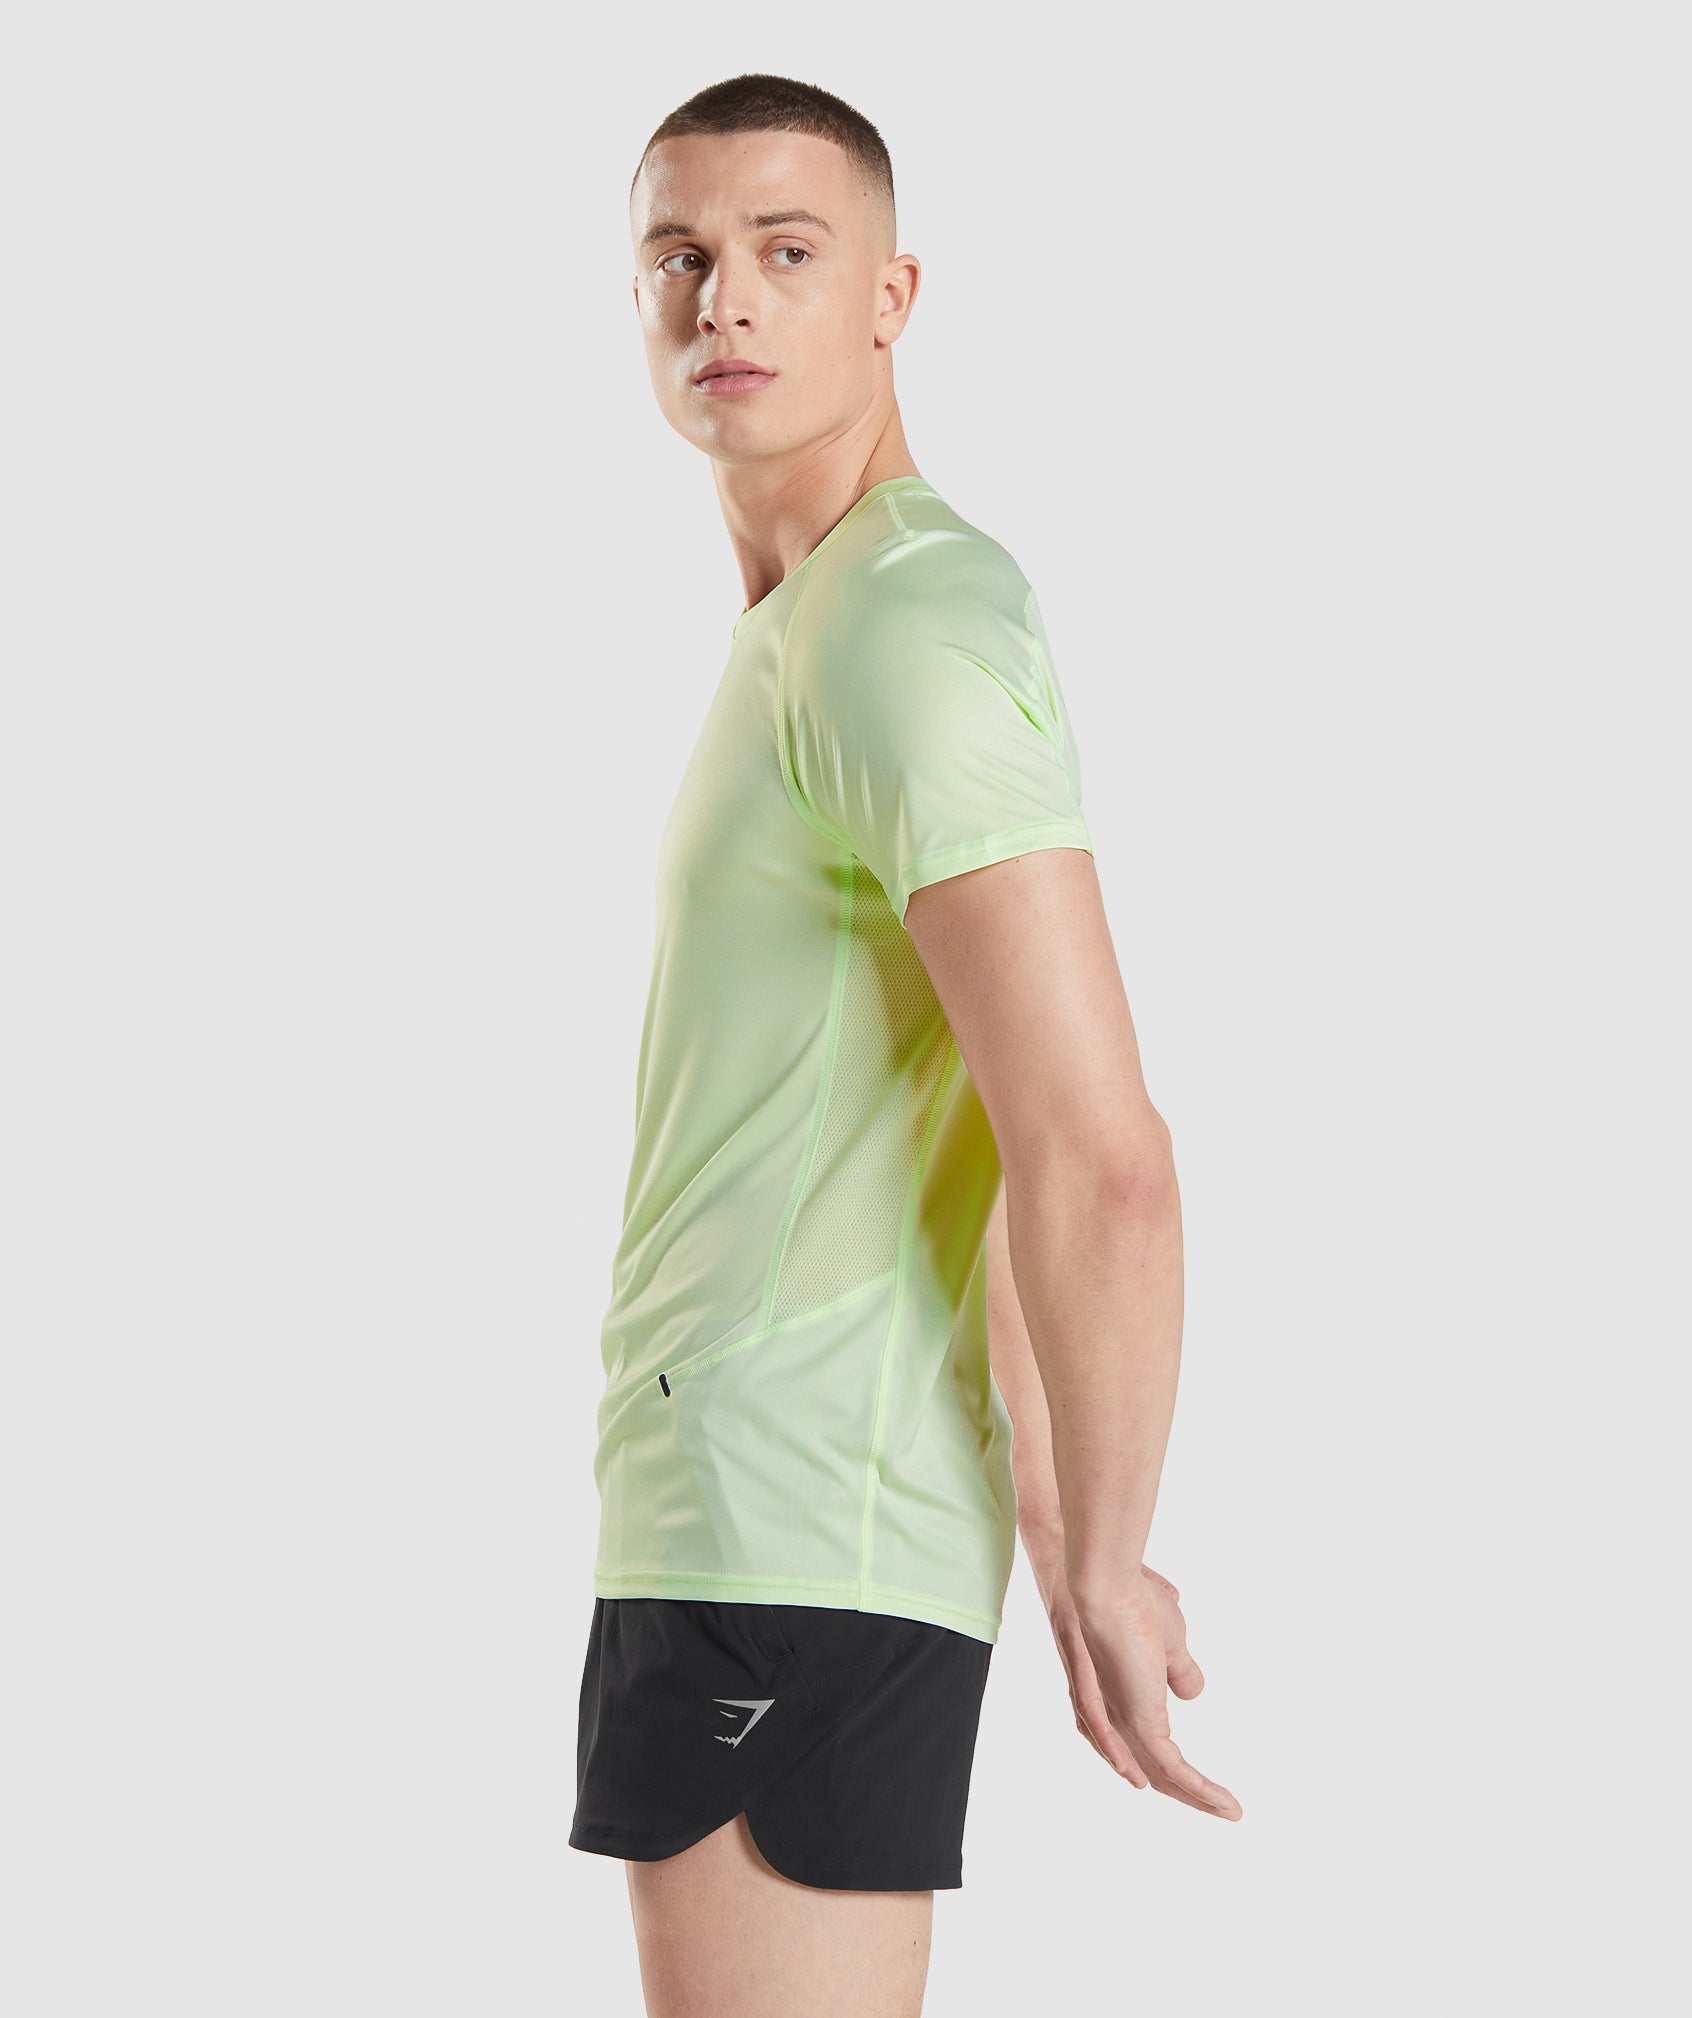 Speed Evolve T-Shirt in Cucumber Green - view 3